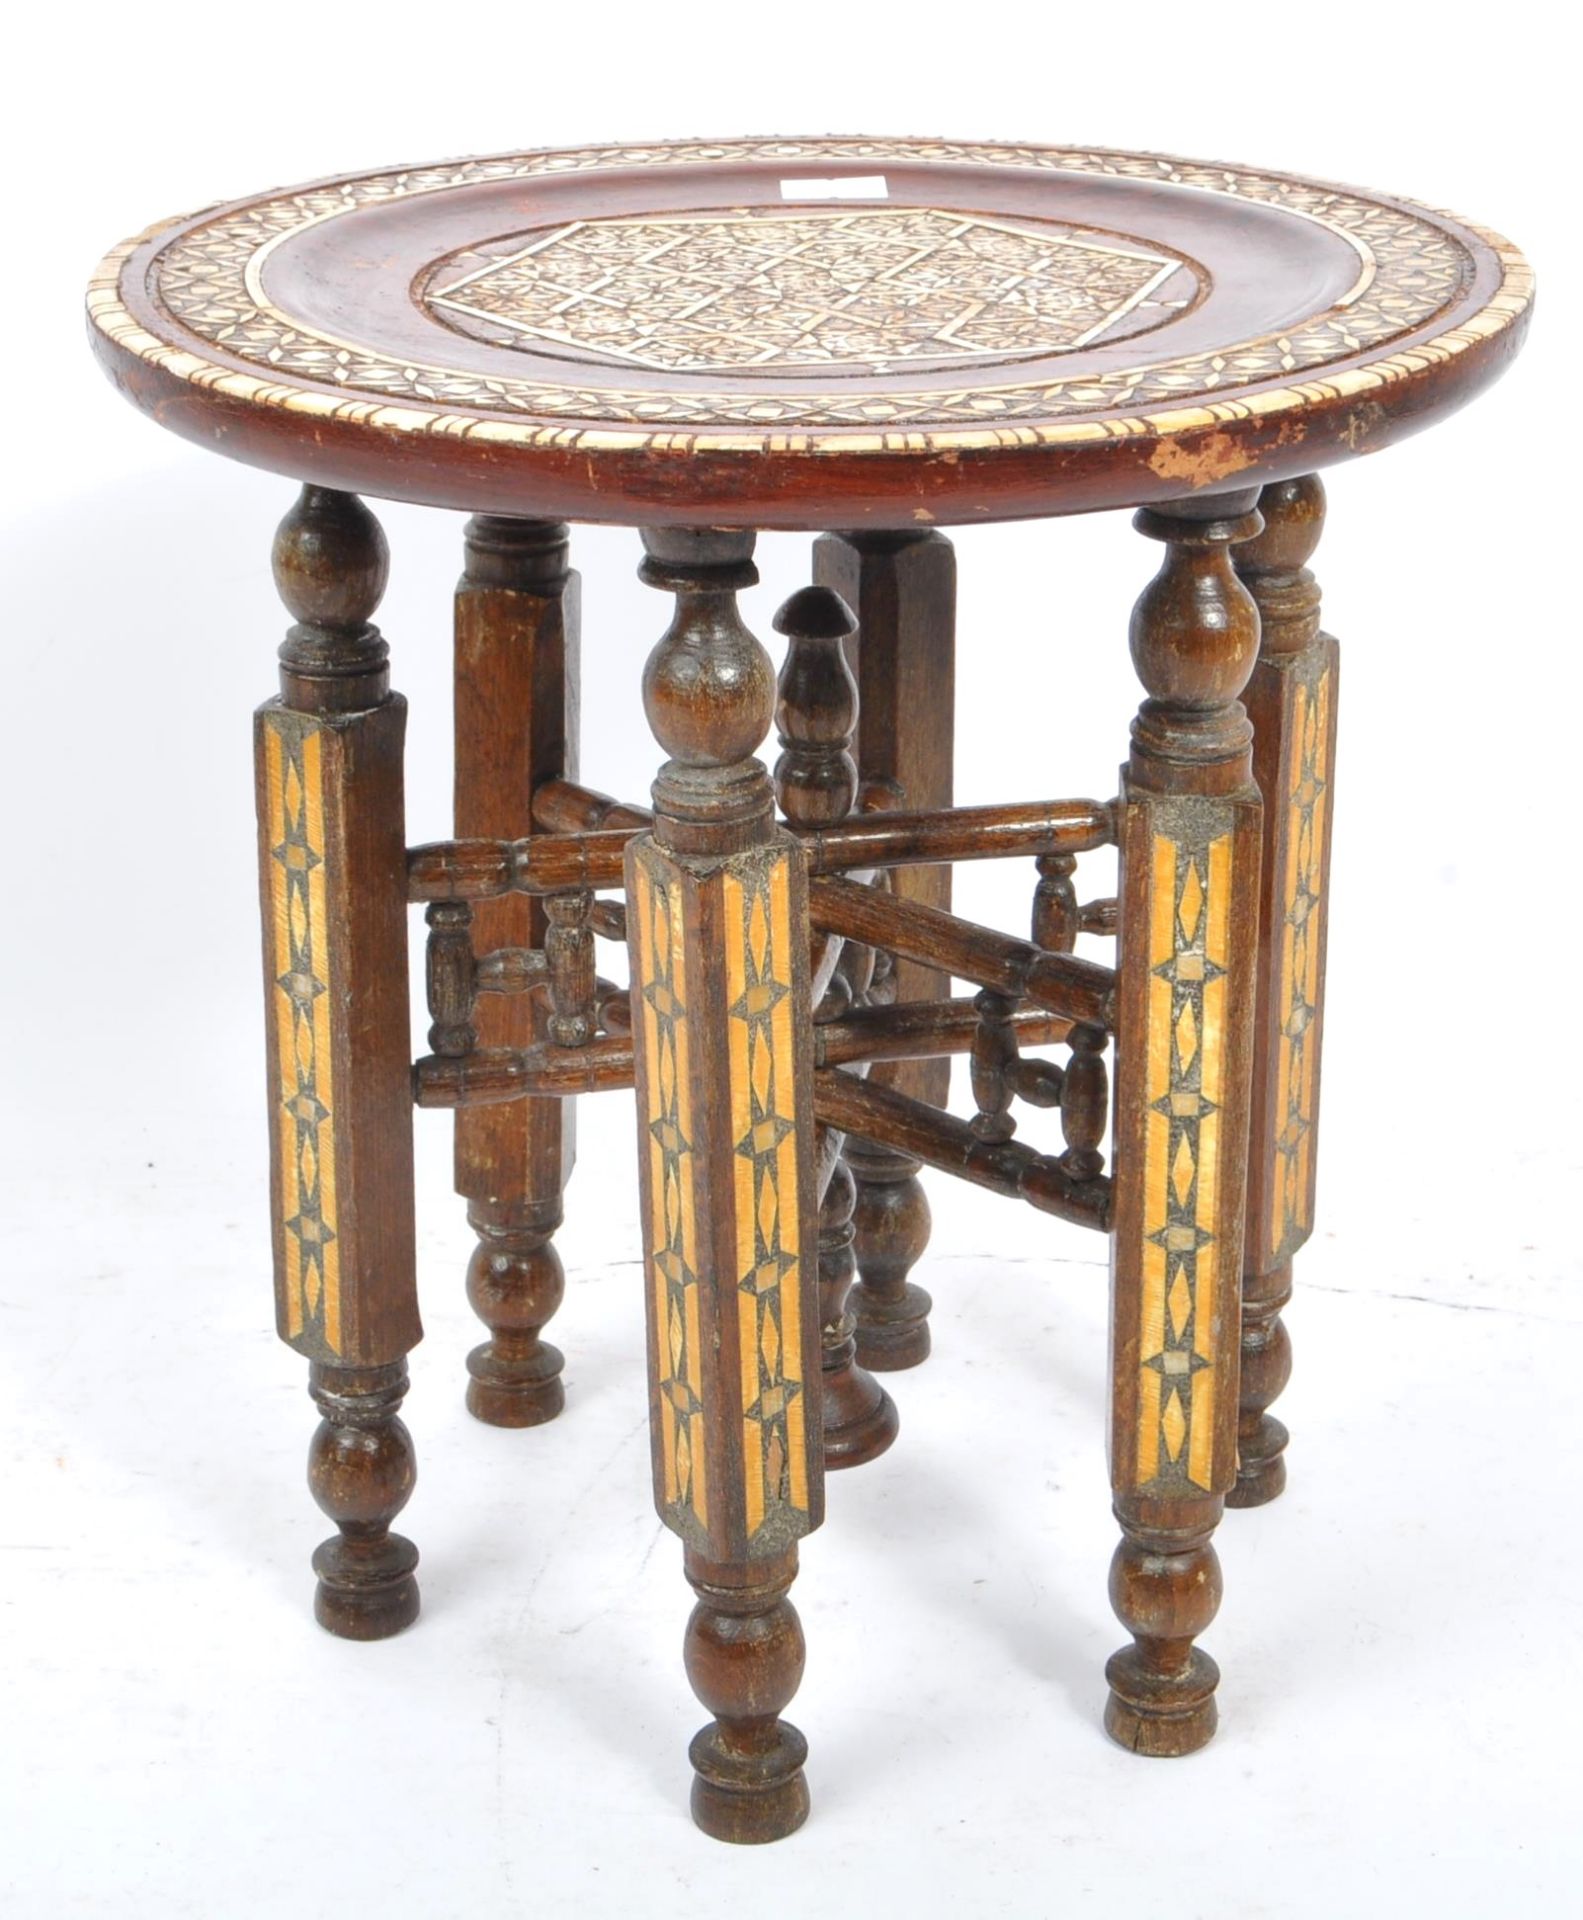 VINTAGE 20TH CENTURY SMALL PROPORTION INDIAN BENARES TABLE